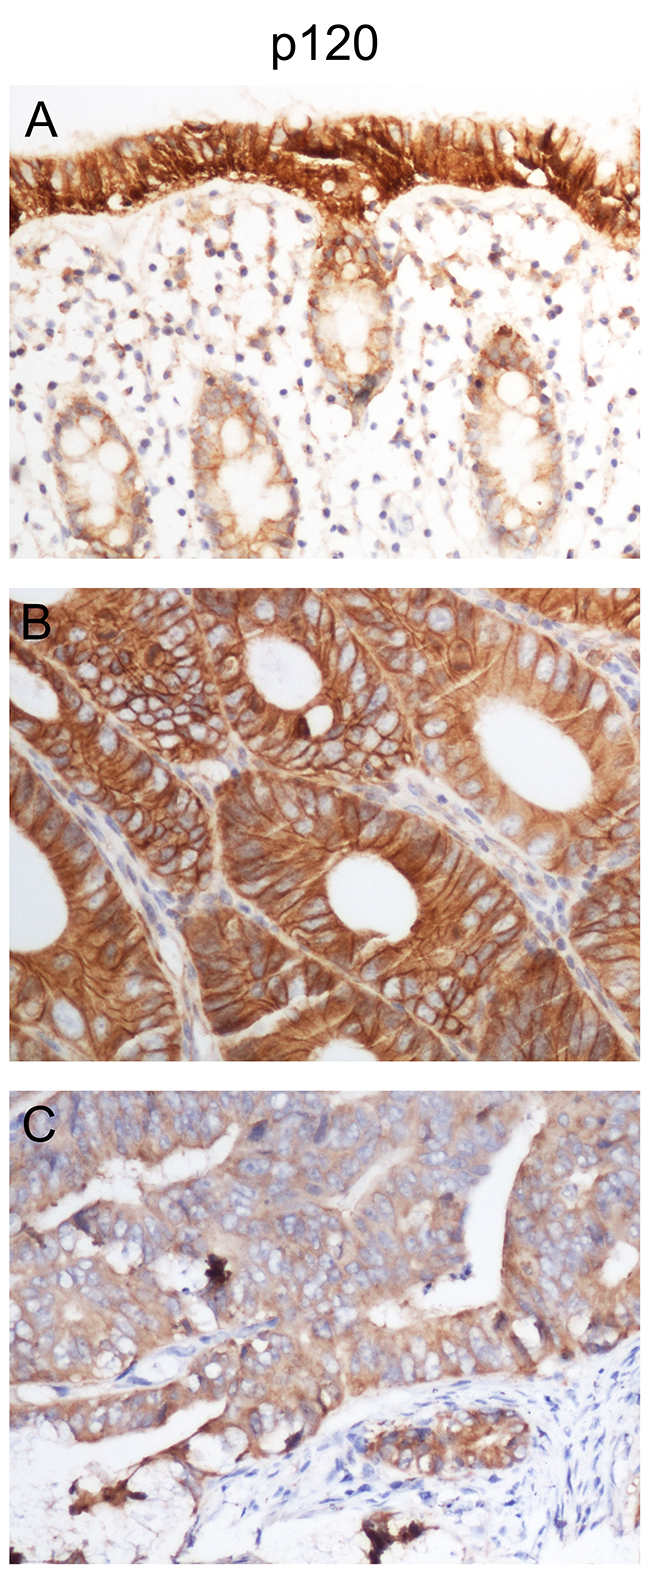 p120 is downregulated in human colon cancer tissues.